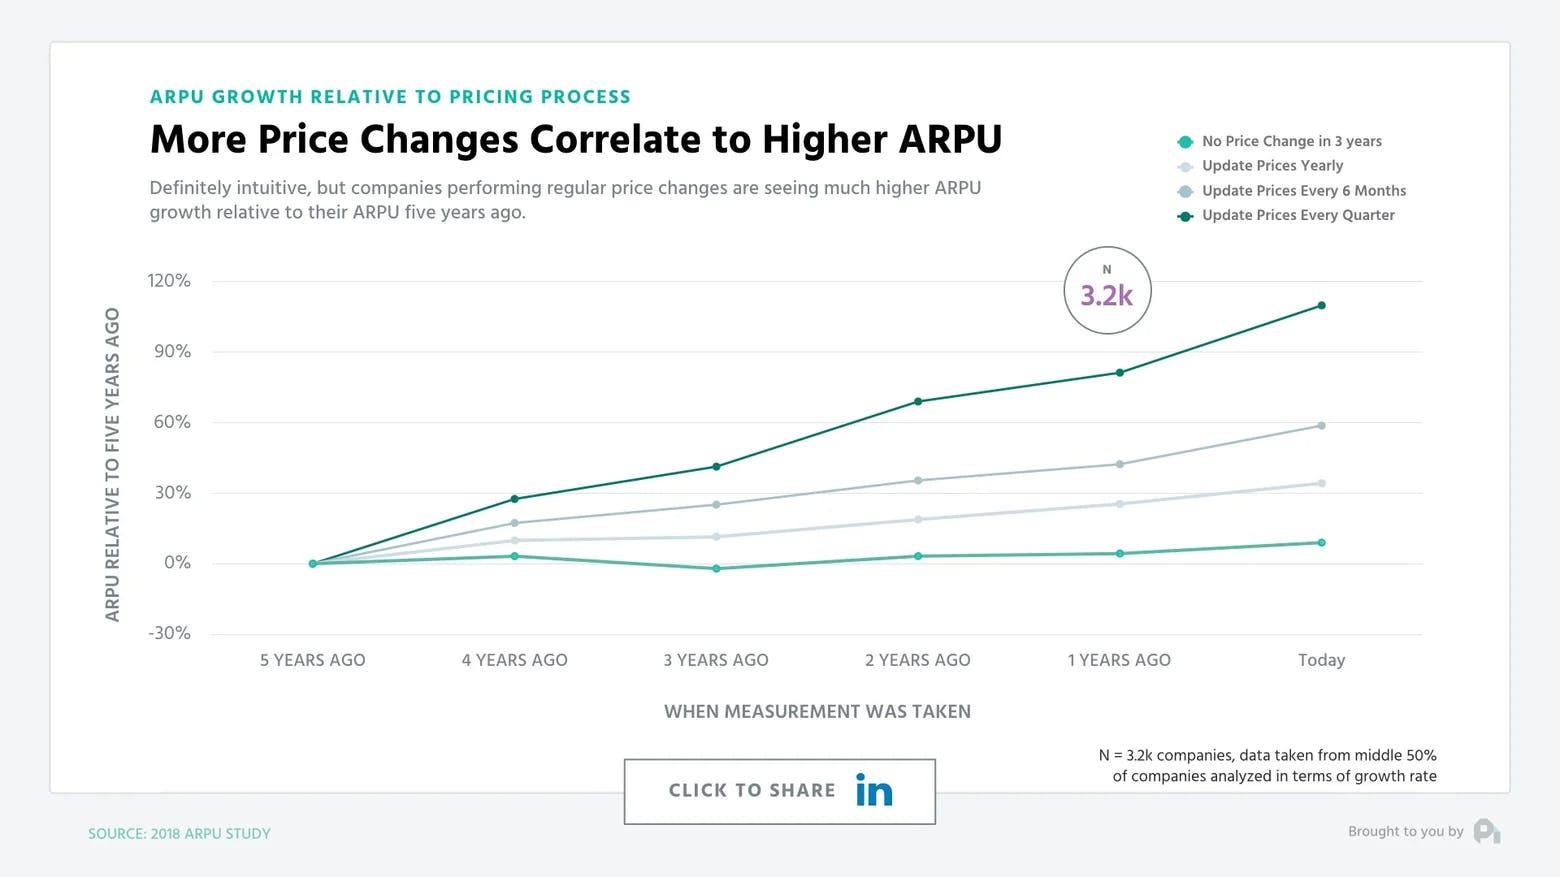 More Price Changes Correlate to Higher ARPU